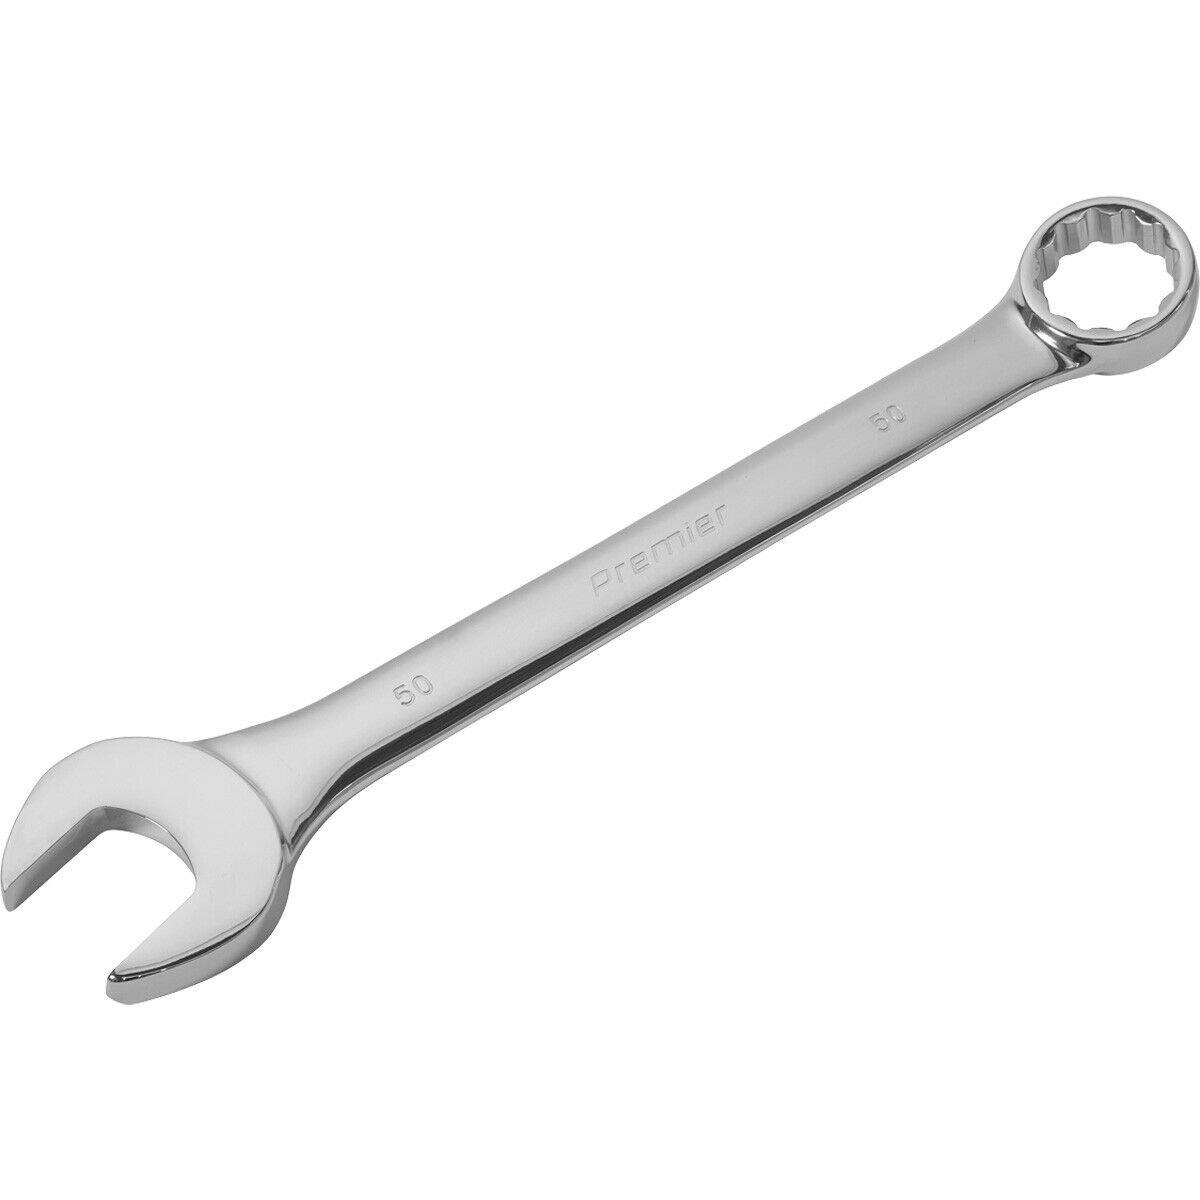 50mm EXTRA LARGE Combination Spanner - Open Ended & 12 Point Metric Ring Wrench